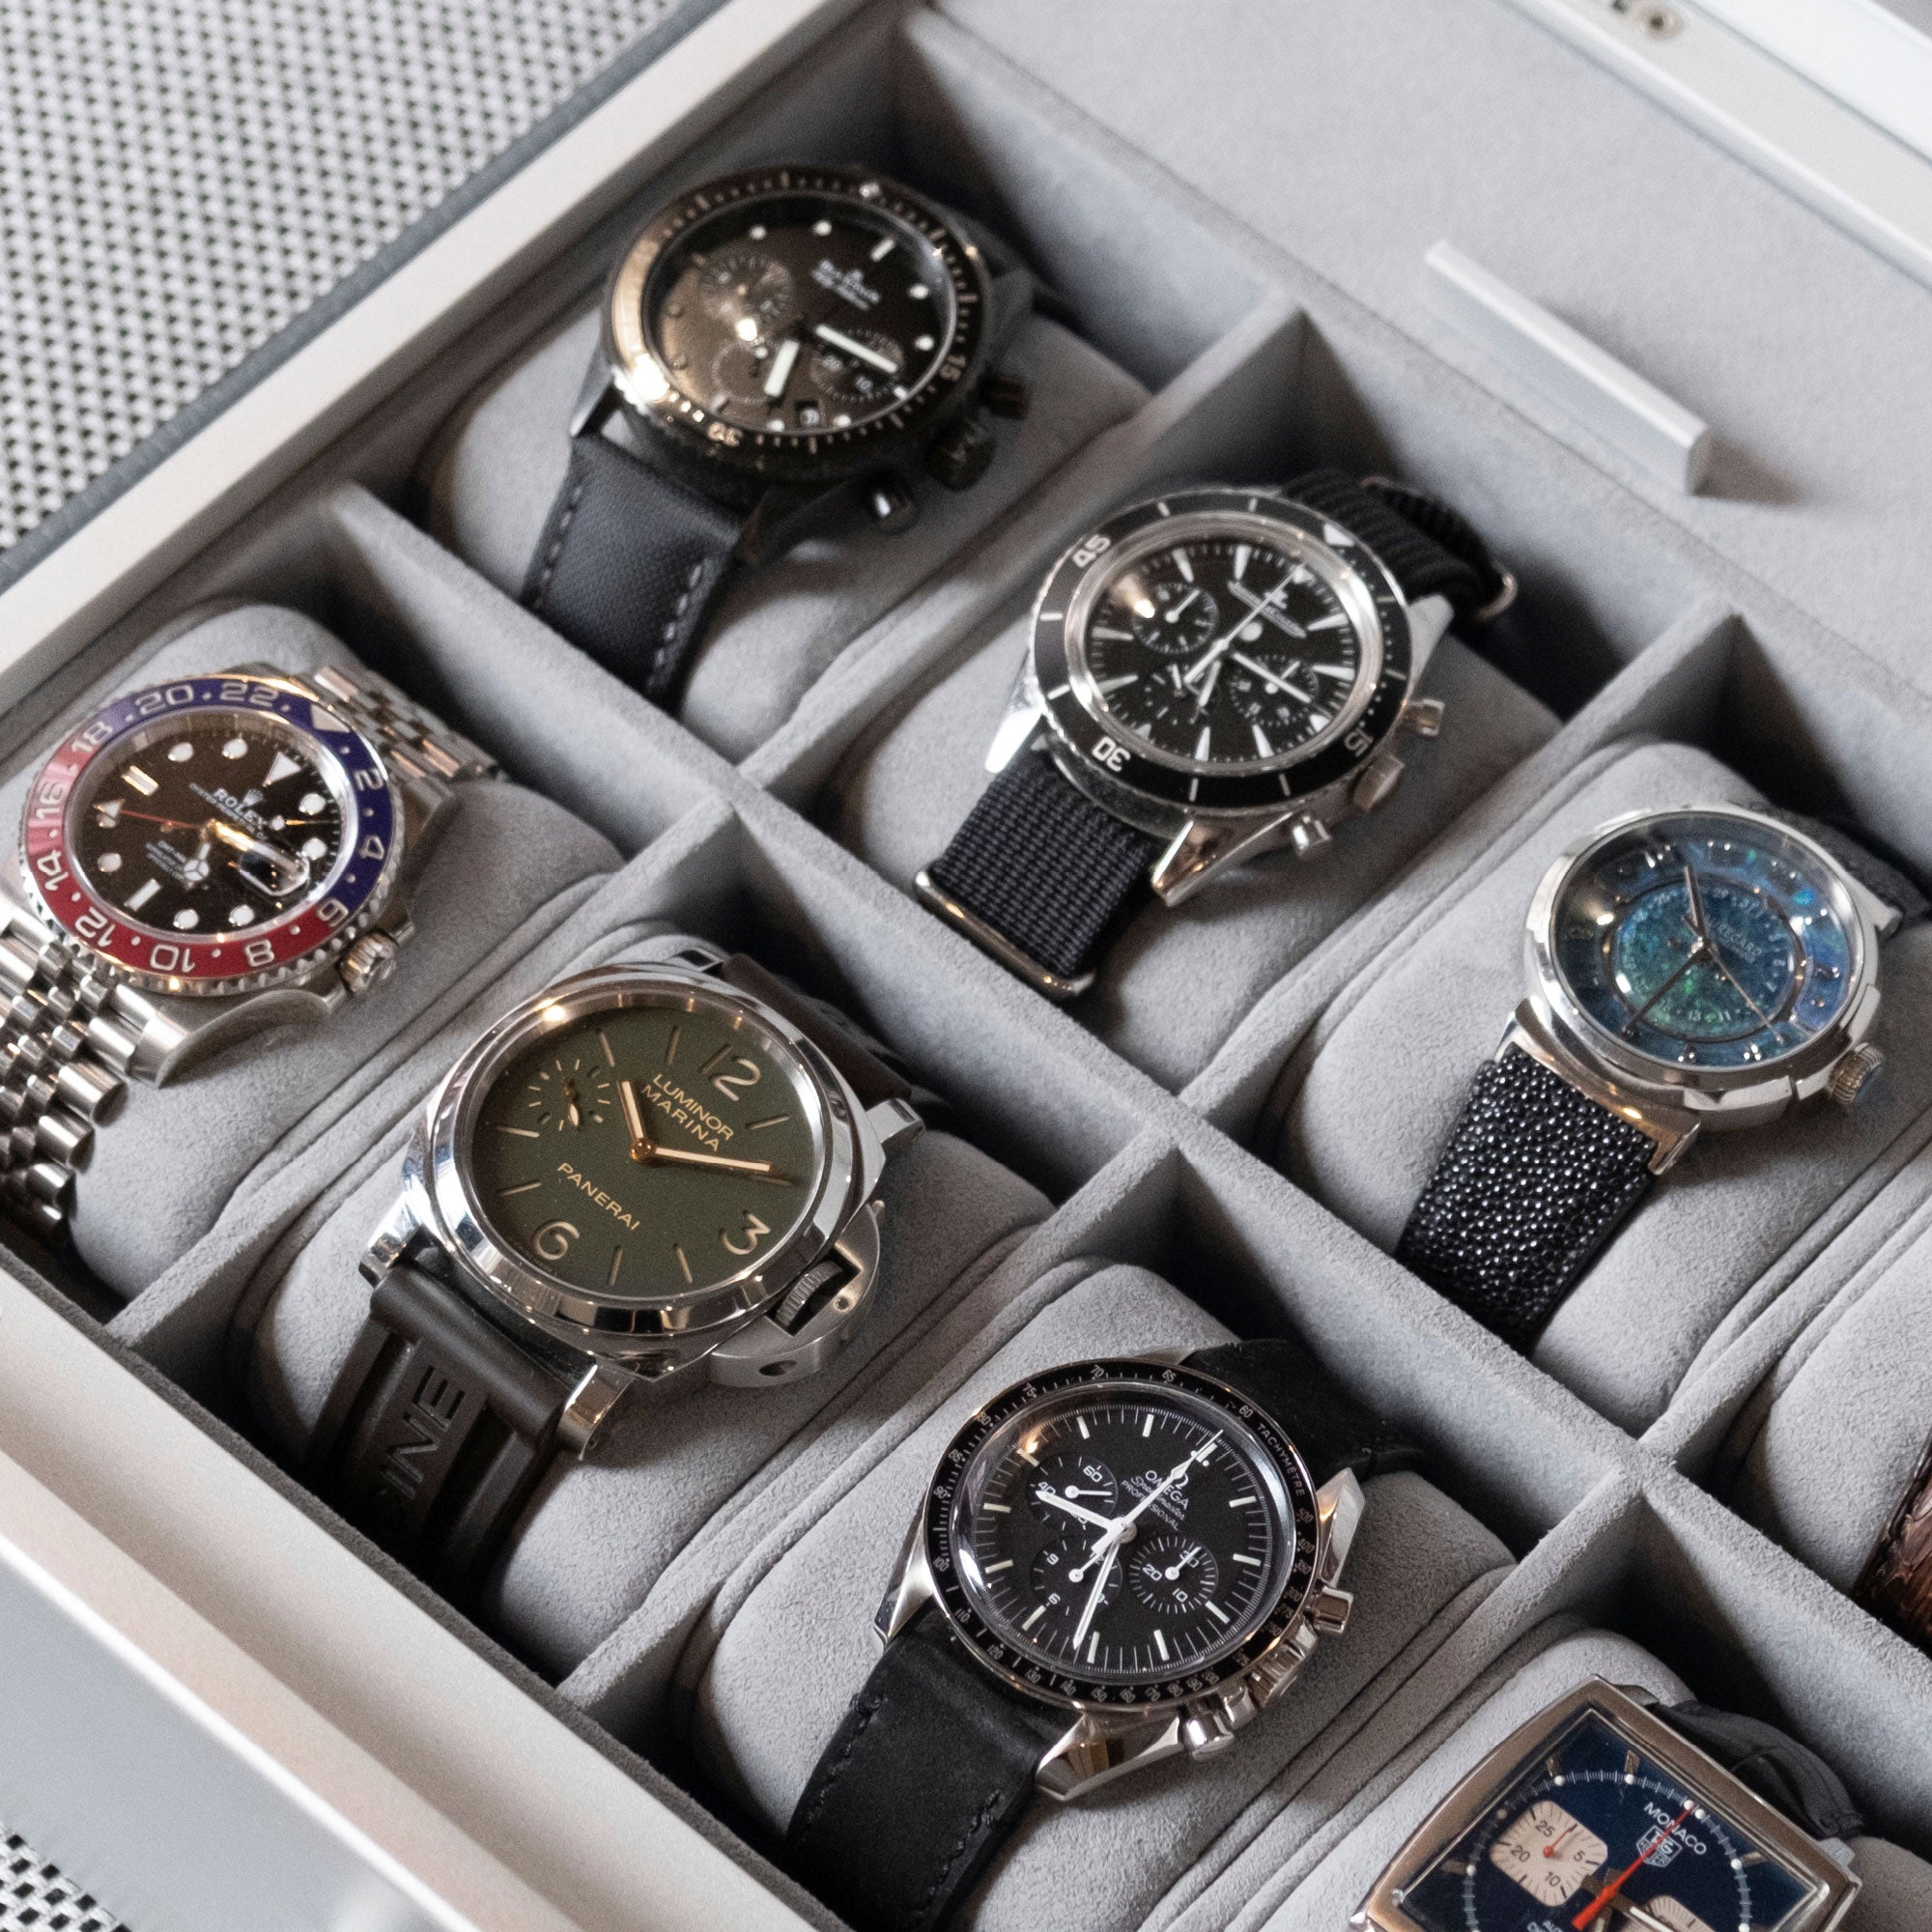 Detail photo of luxury watch collection displayed in Spence 12 Watch box in cloud grey leather and fog grey Alcantara